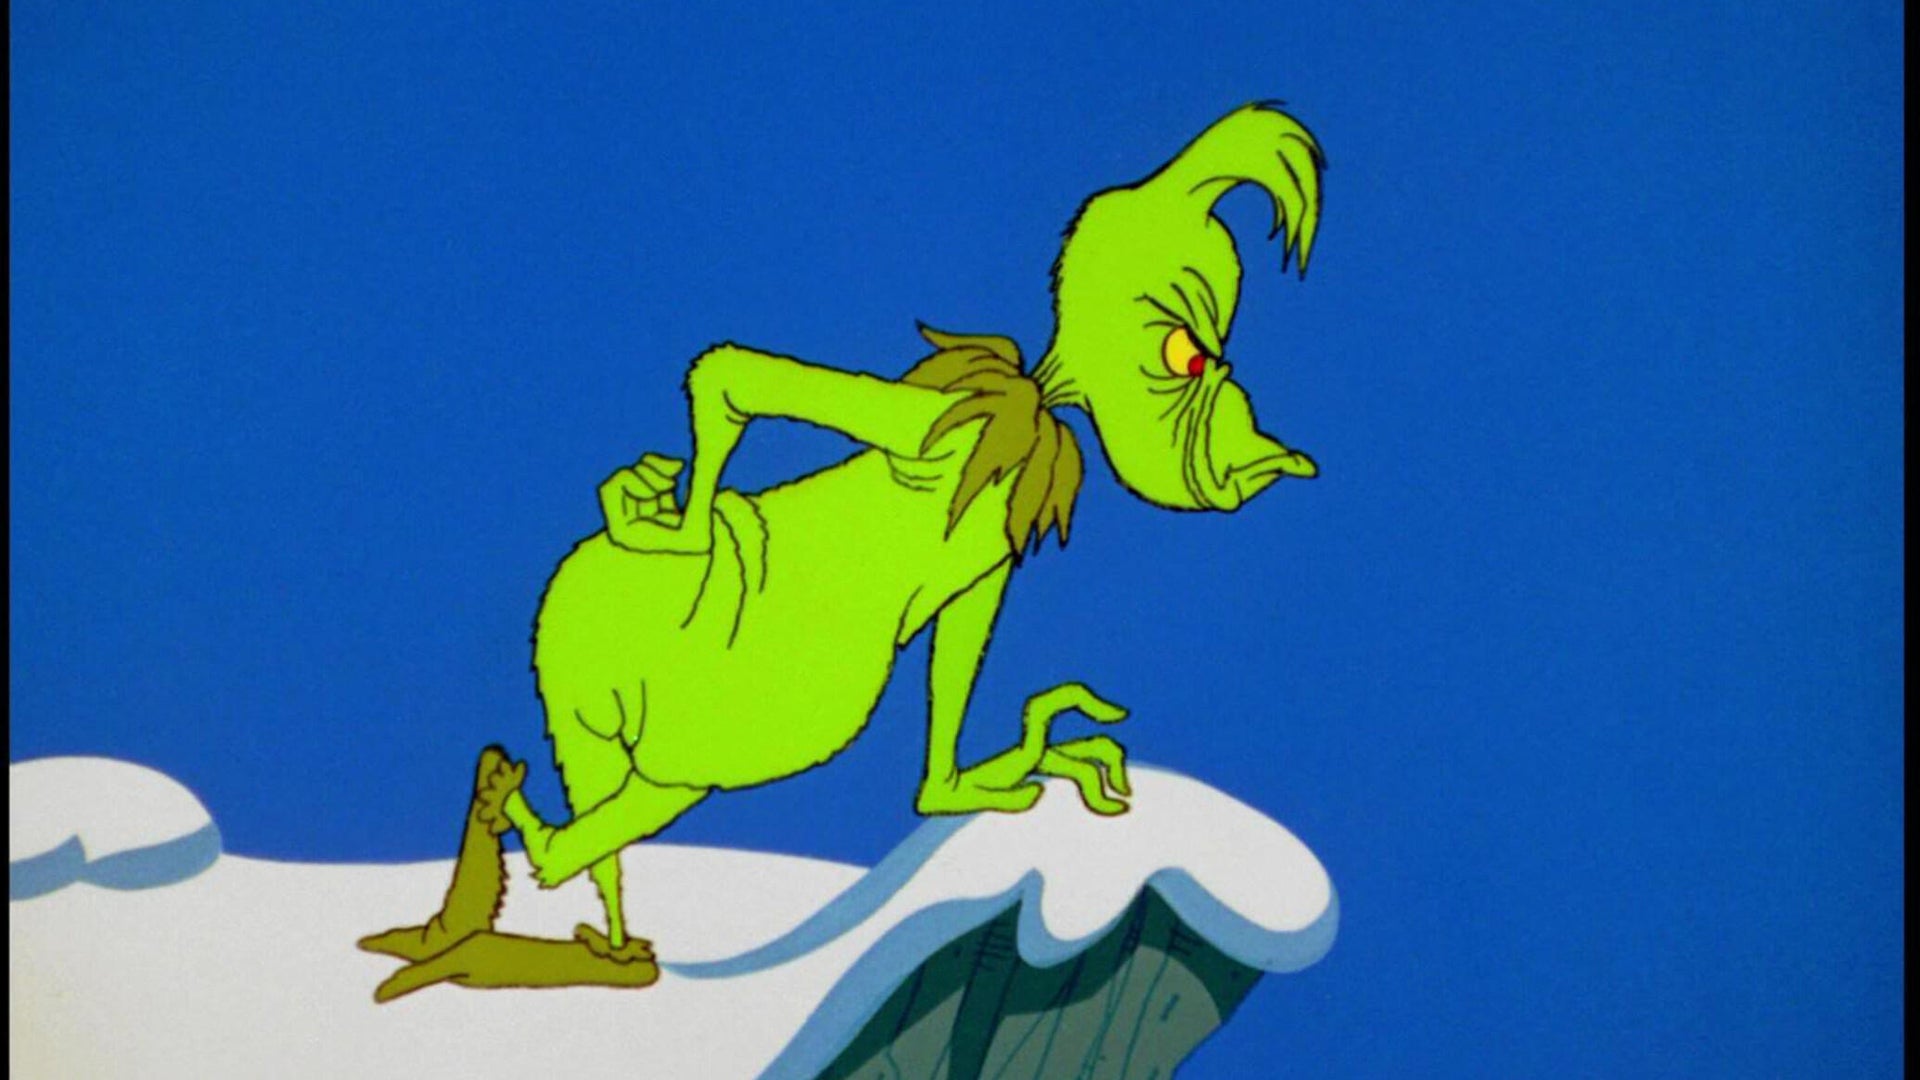 I'm reminded of the Grinch as he sat watching and waiting to see how t...